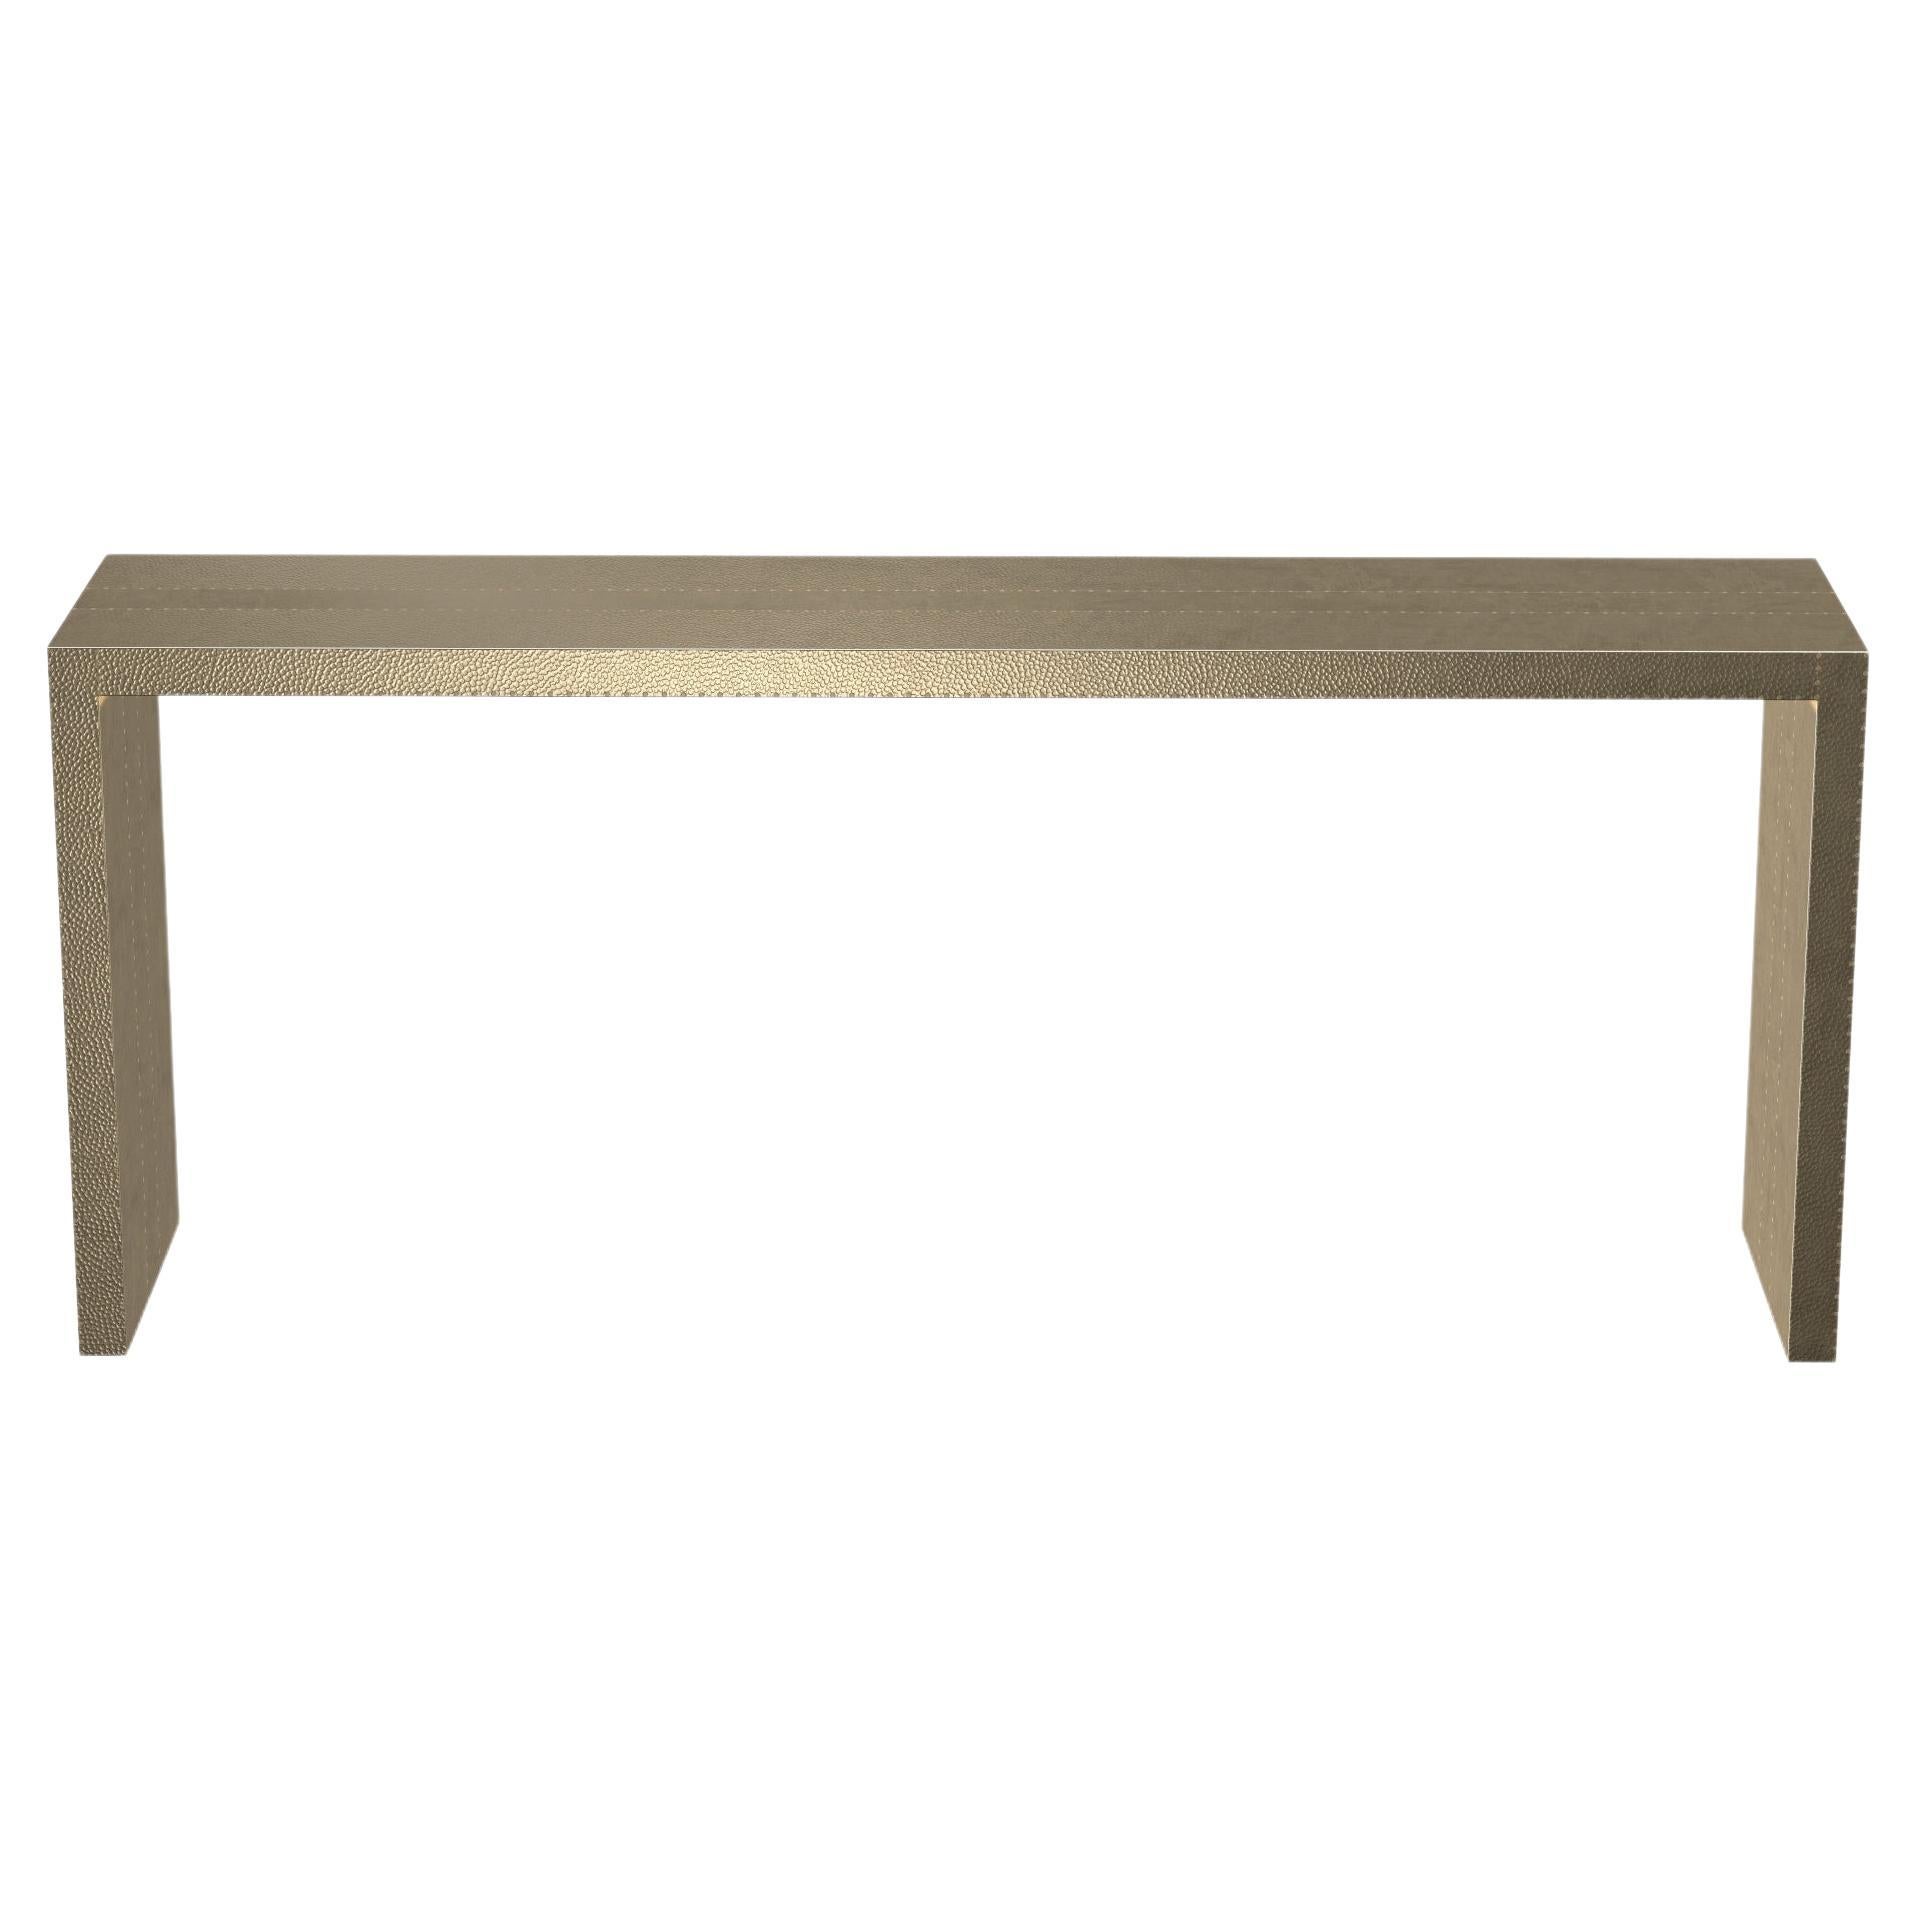 Art Deco Desks and Writing Console Tables Mid. Hammered in Brass by Alison Spear